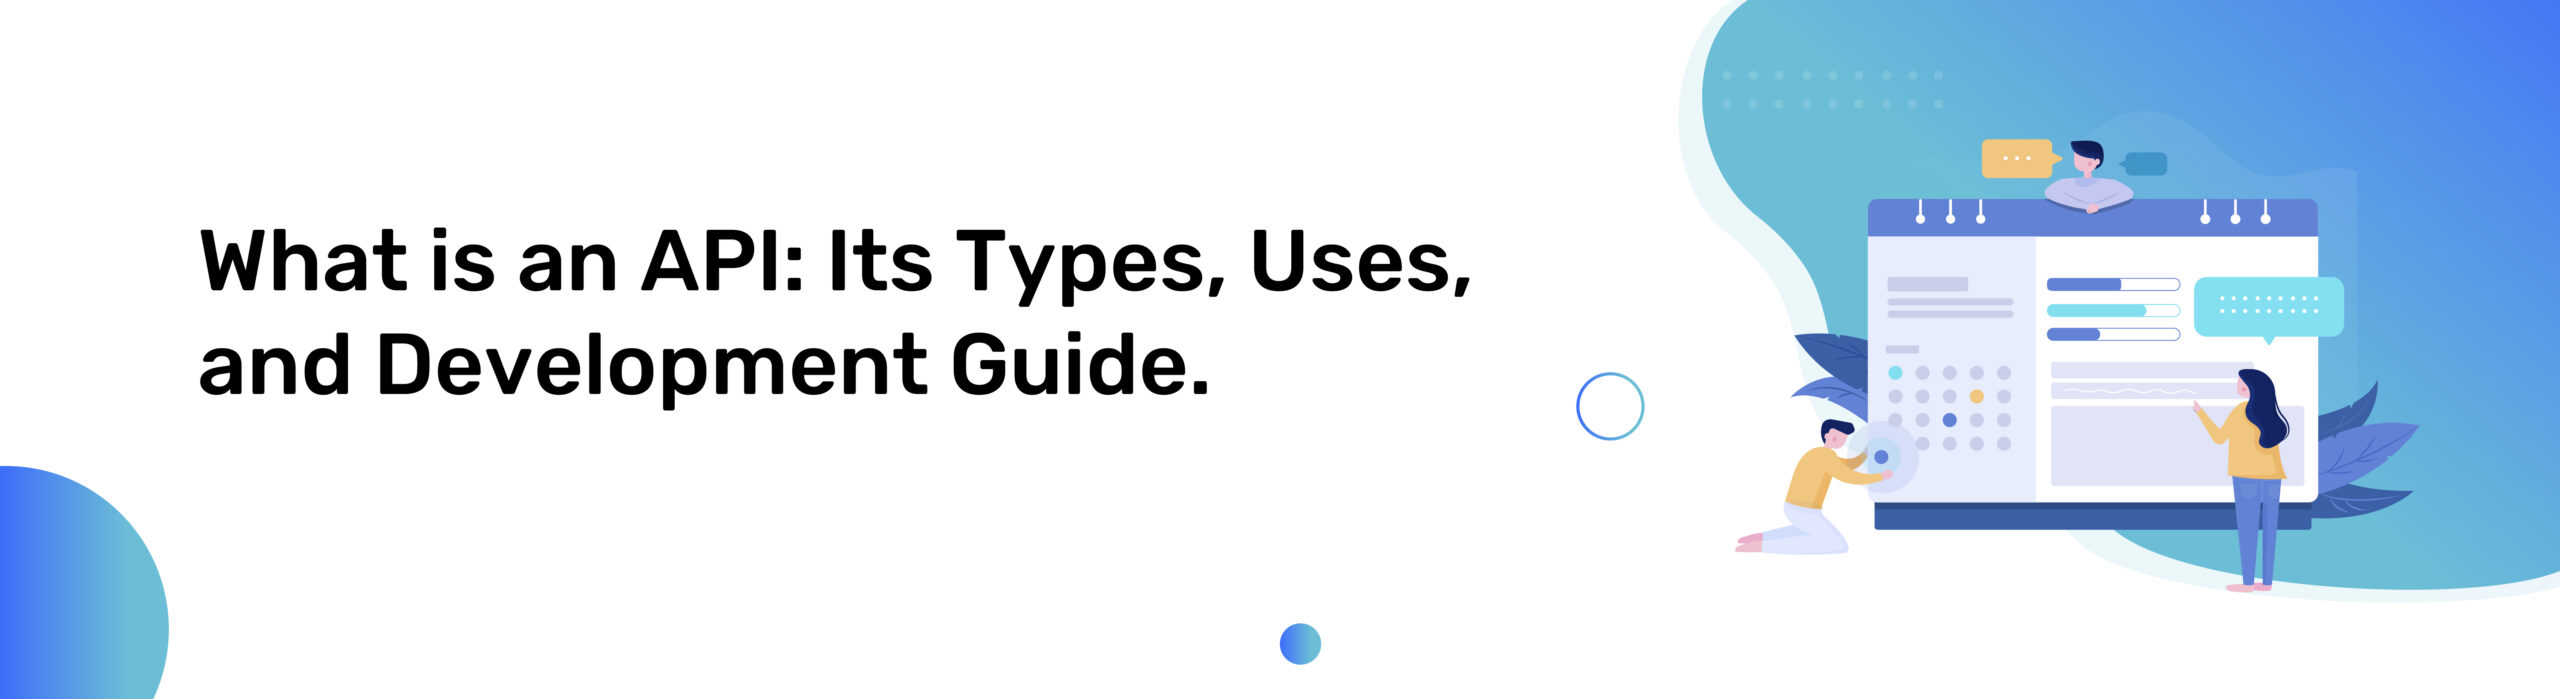 What is an API: Its Types, Uses, and Development Guide.